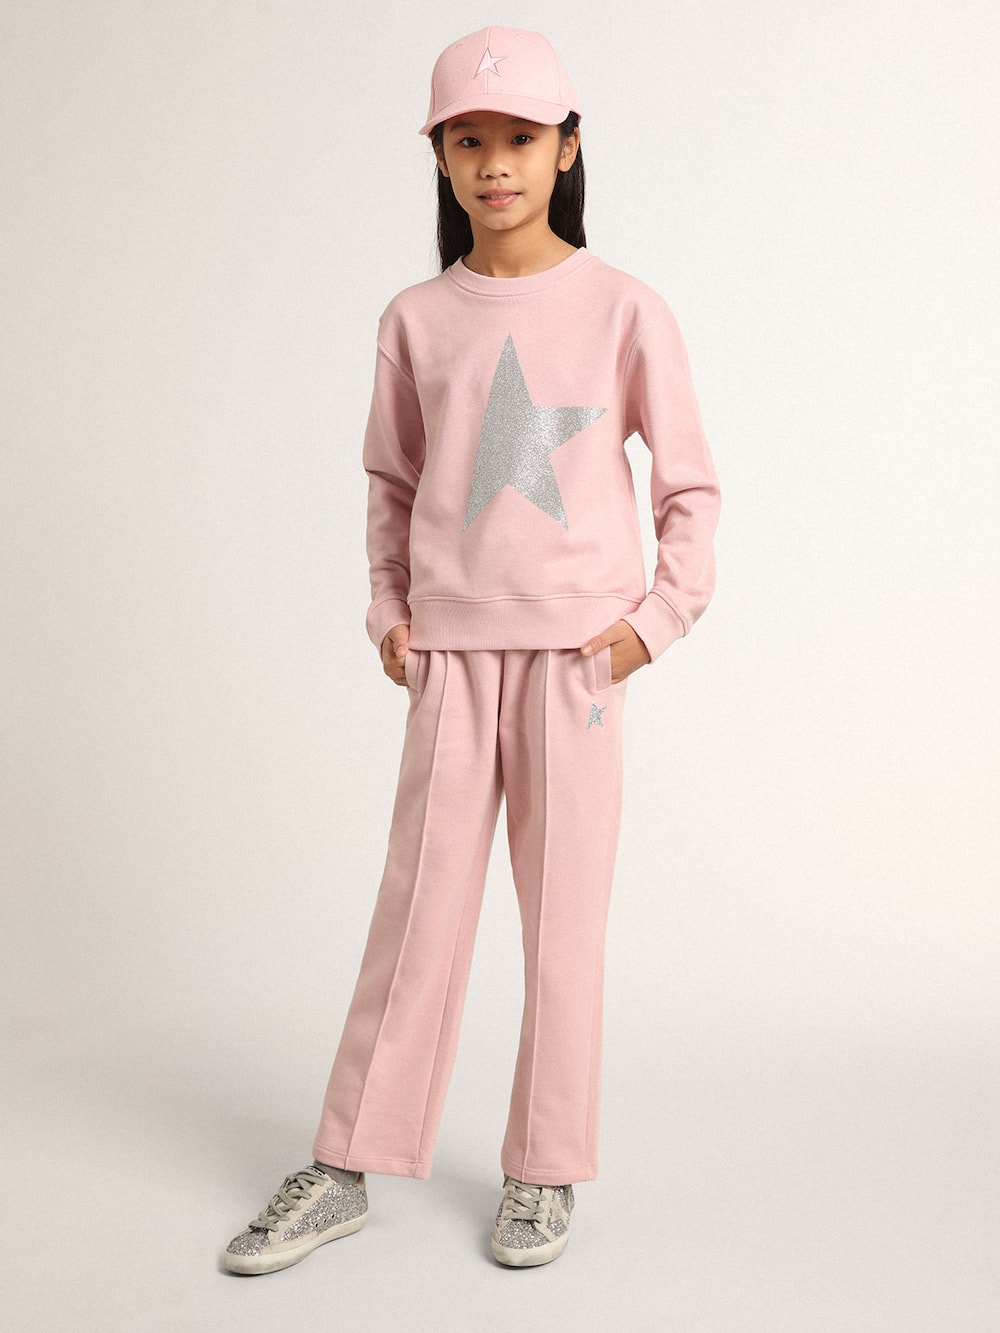 Golden Goose - Pink sweatshirt with maxi star in silver glitter on the front in 